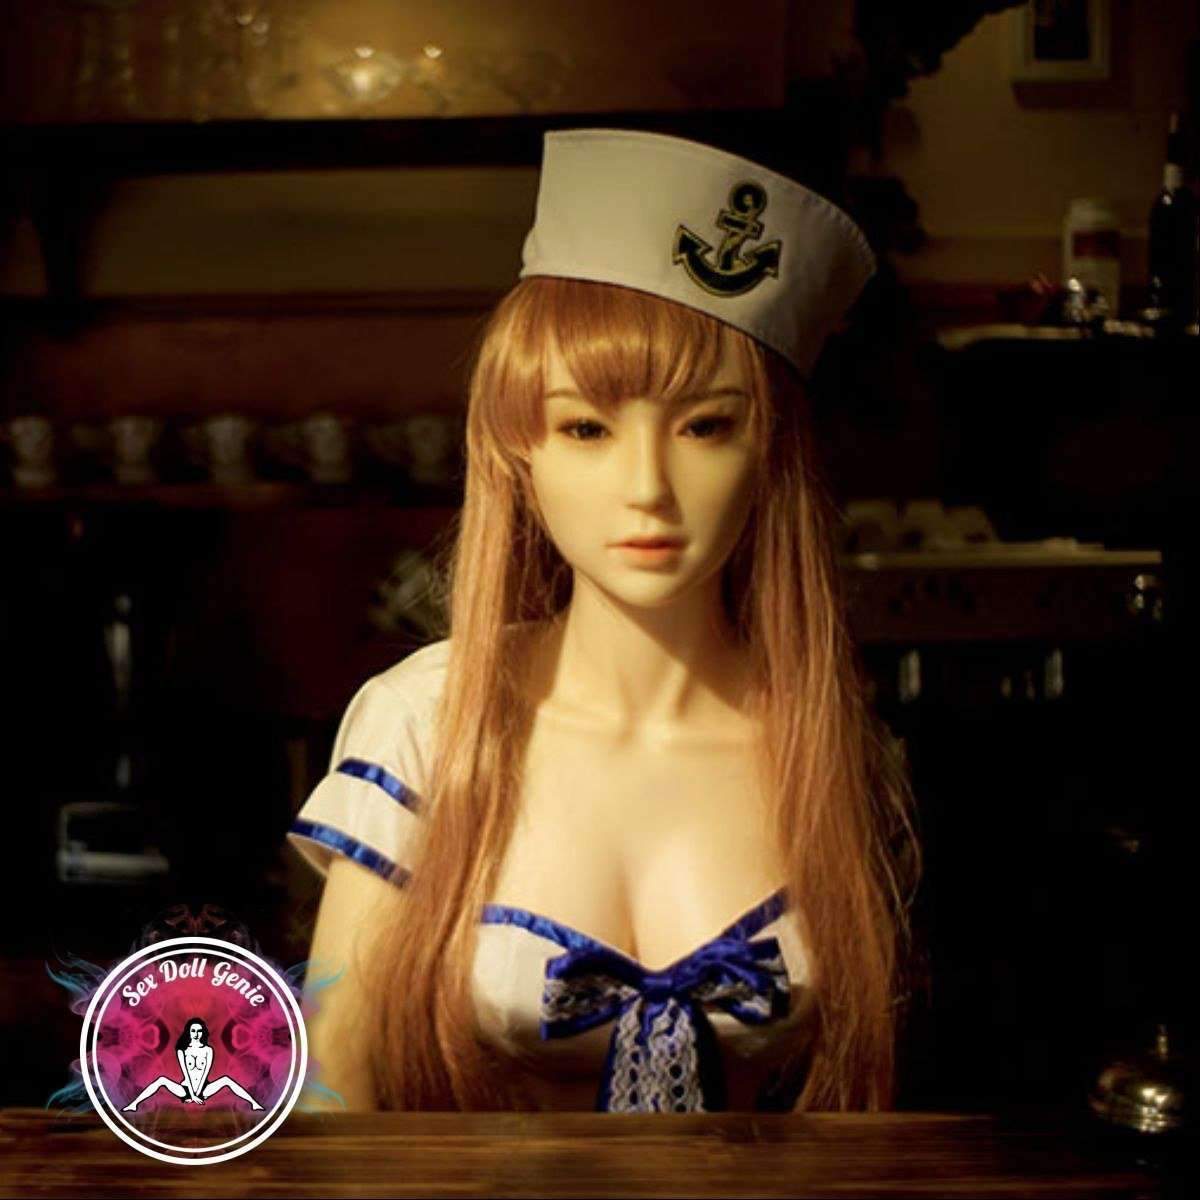 DS Doll - 163Plus - Alisa Head - Type 1 D Cup Silicone Doll-19